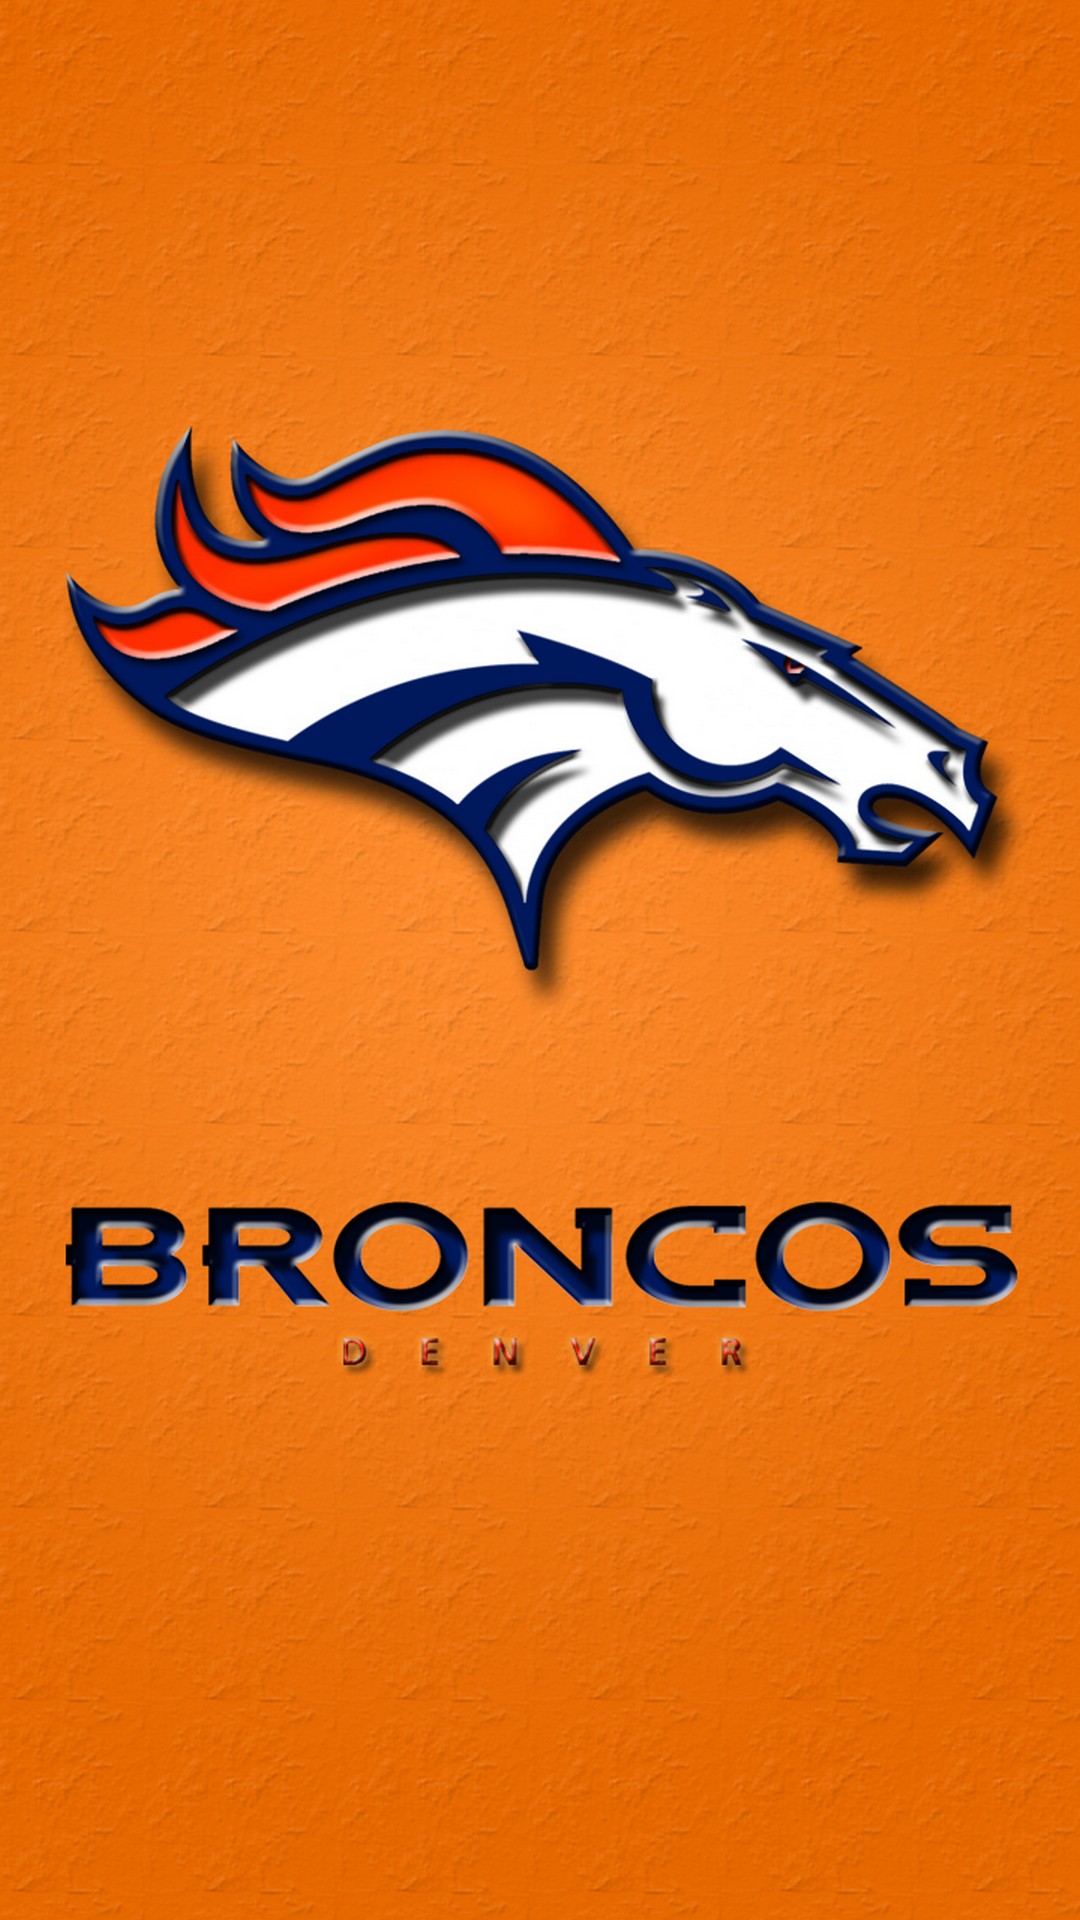 Denver Broncos iPhone 7 Wallpaper with high-resolution 1080x1920 pixel. Download and set as wallpaper for Apple iPhone X, XS Max, XR, 8, 7, 6, SE, iPad, Android